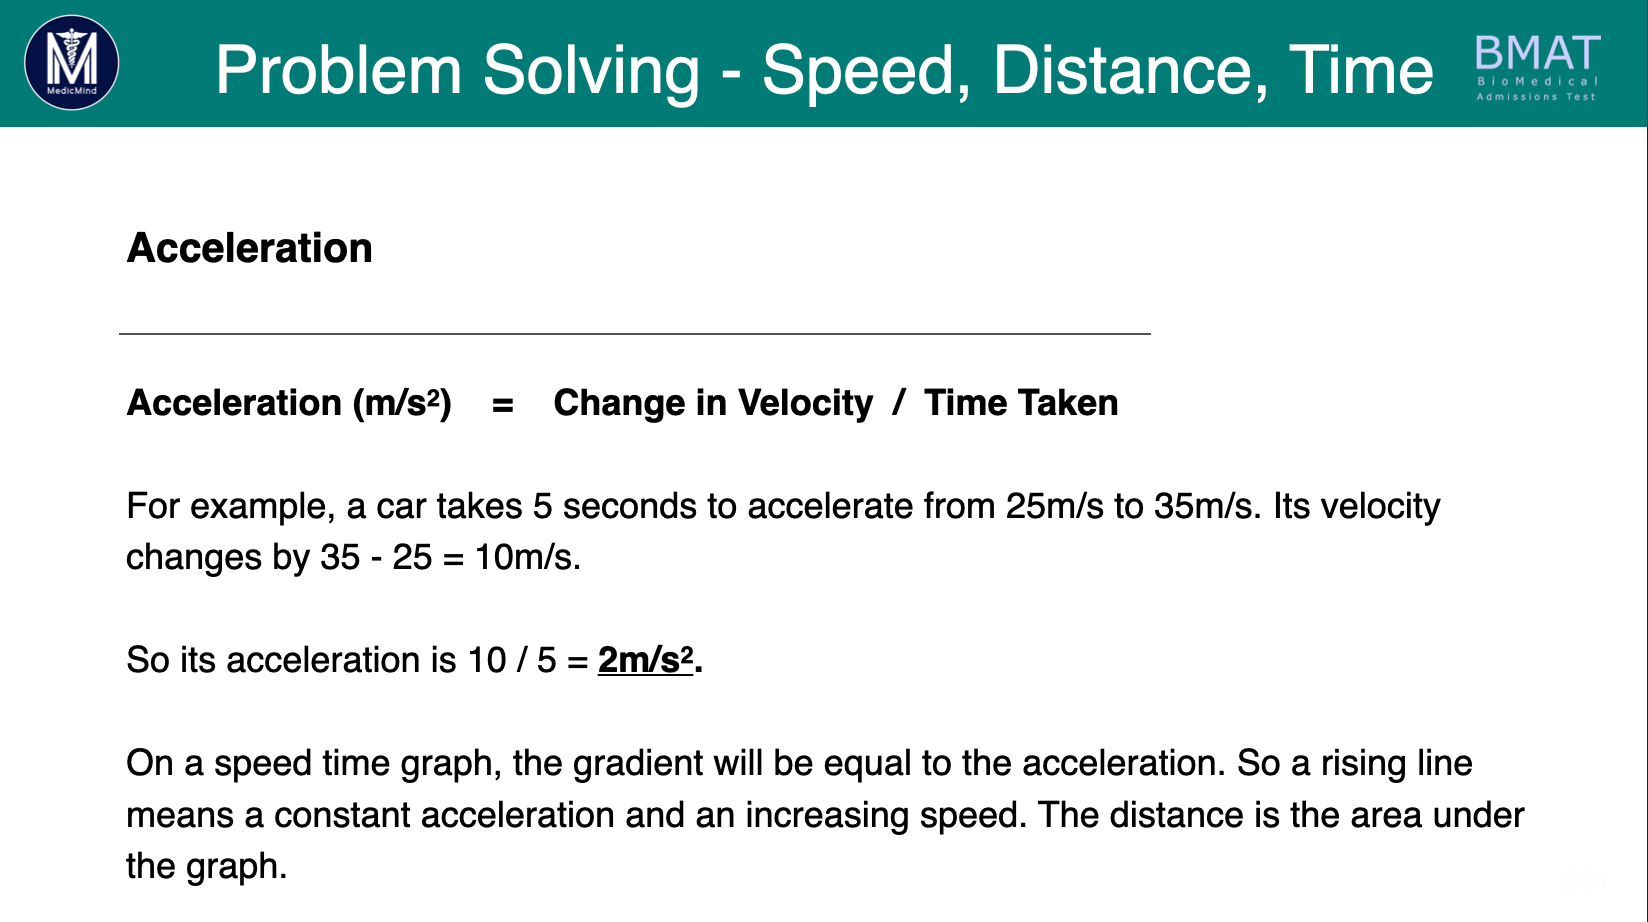 Speed + Distance: Theory